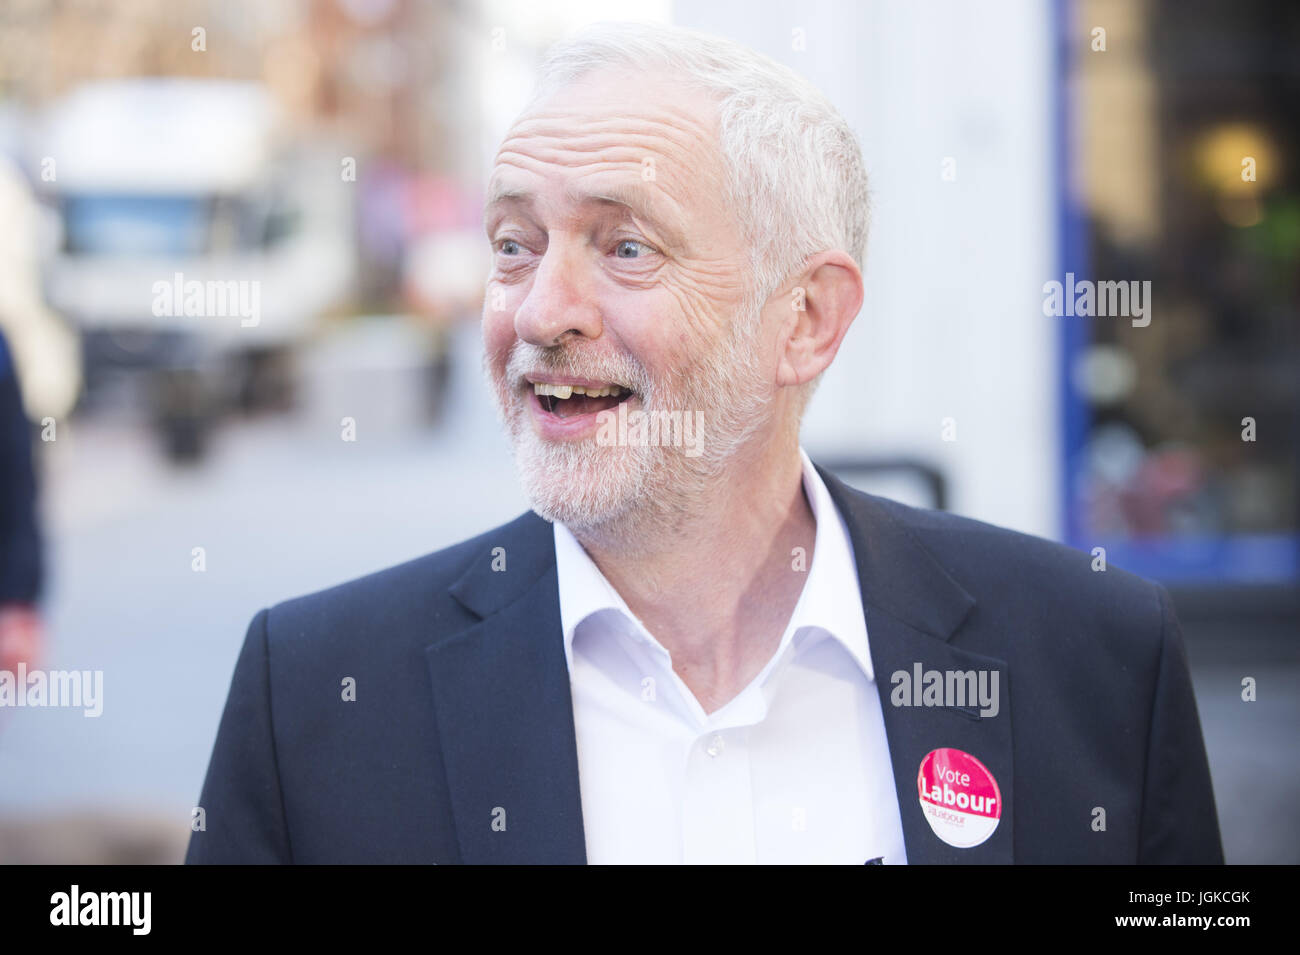 Labour leader Jeremy Corbyn kicks off his eve of poll tour of the UK with a stump speech outside the Dune shoe shop in Glasgow  Featuring: Jeremy Corbyn Where: Glasgow, United Kingdom When: 07 Jun 2017 Credit: Euan Cherry/WENN.com Stock Photo